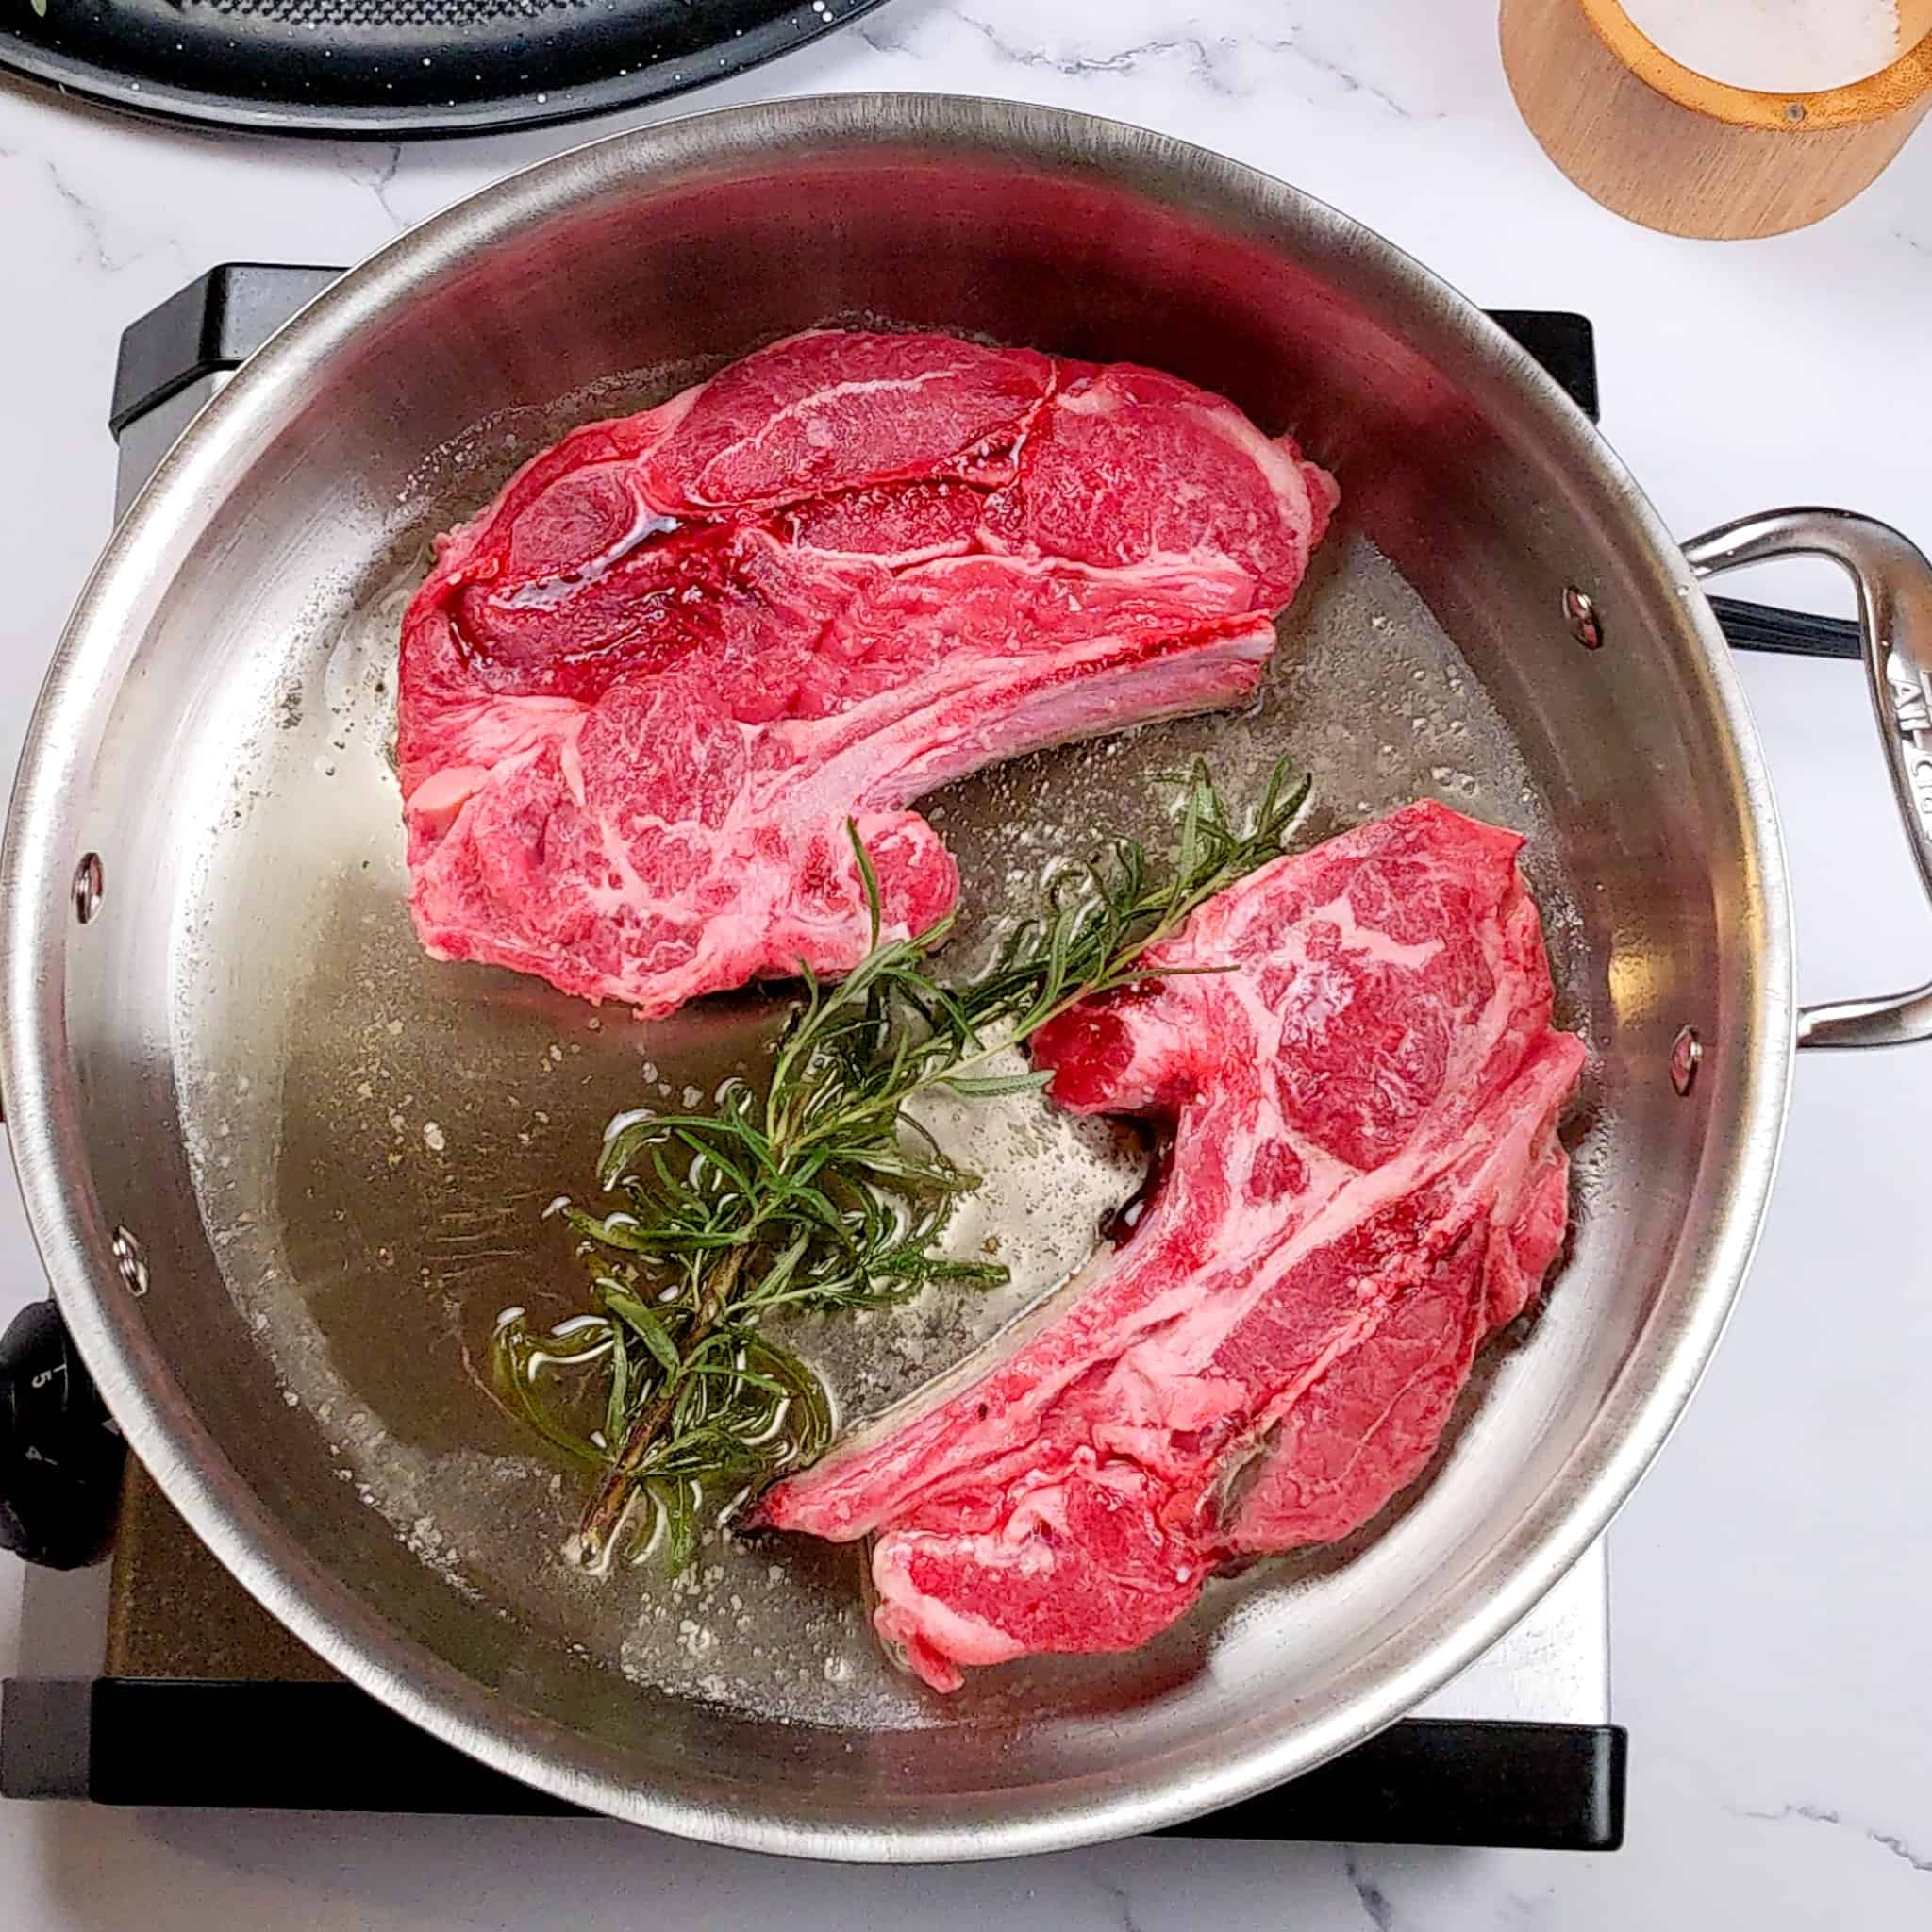 lamb shoulder chops with rosemary searing in an all-clad stainless steel sauté pan